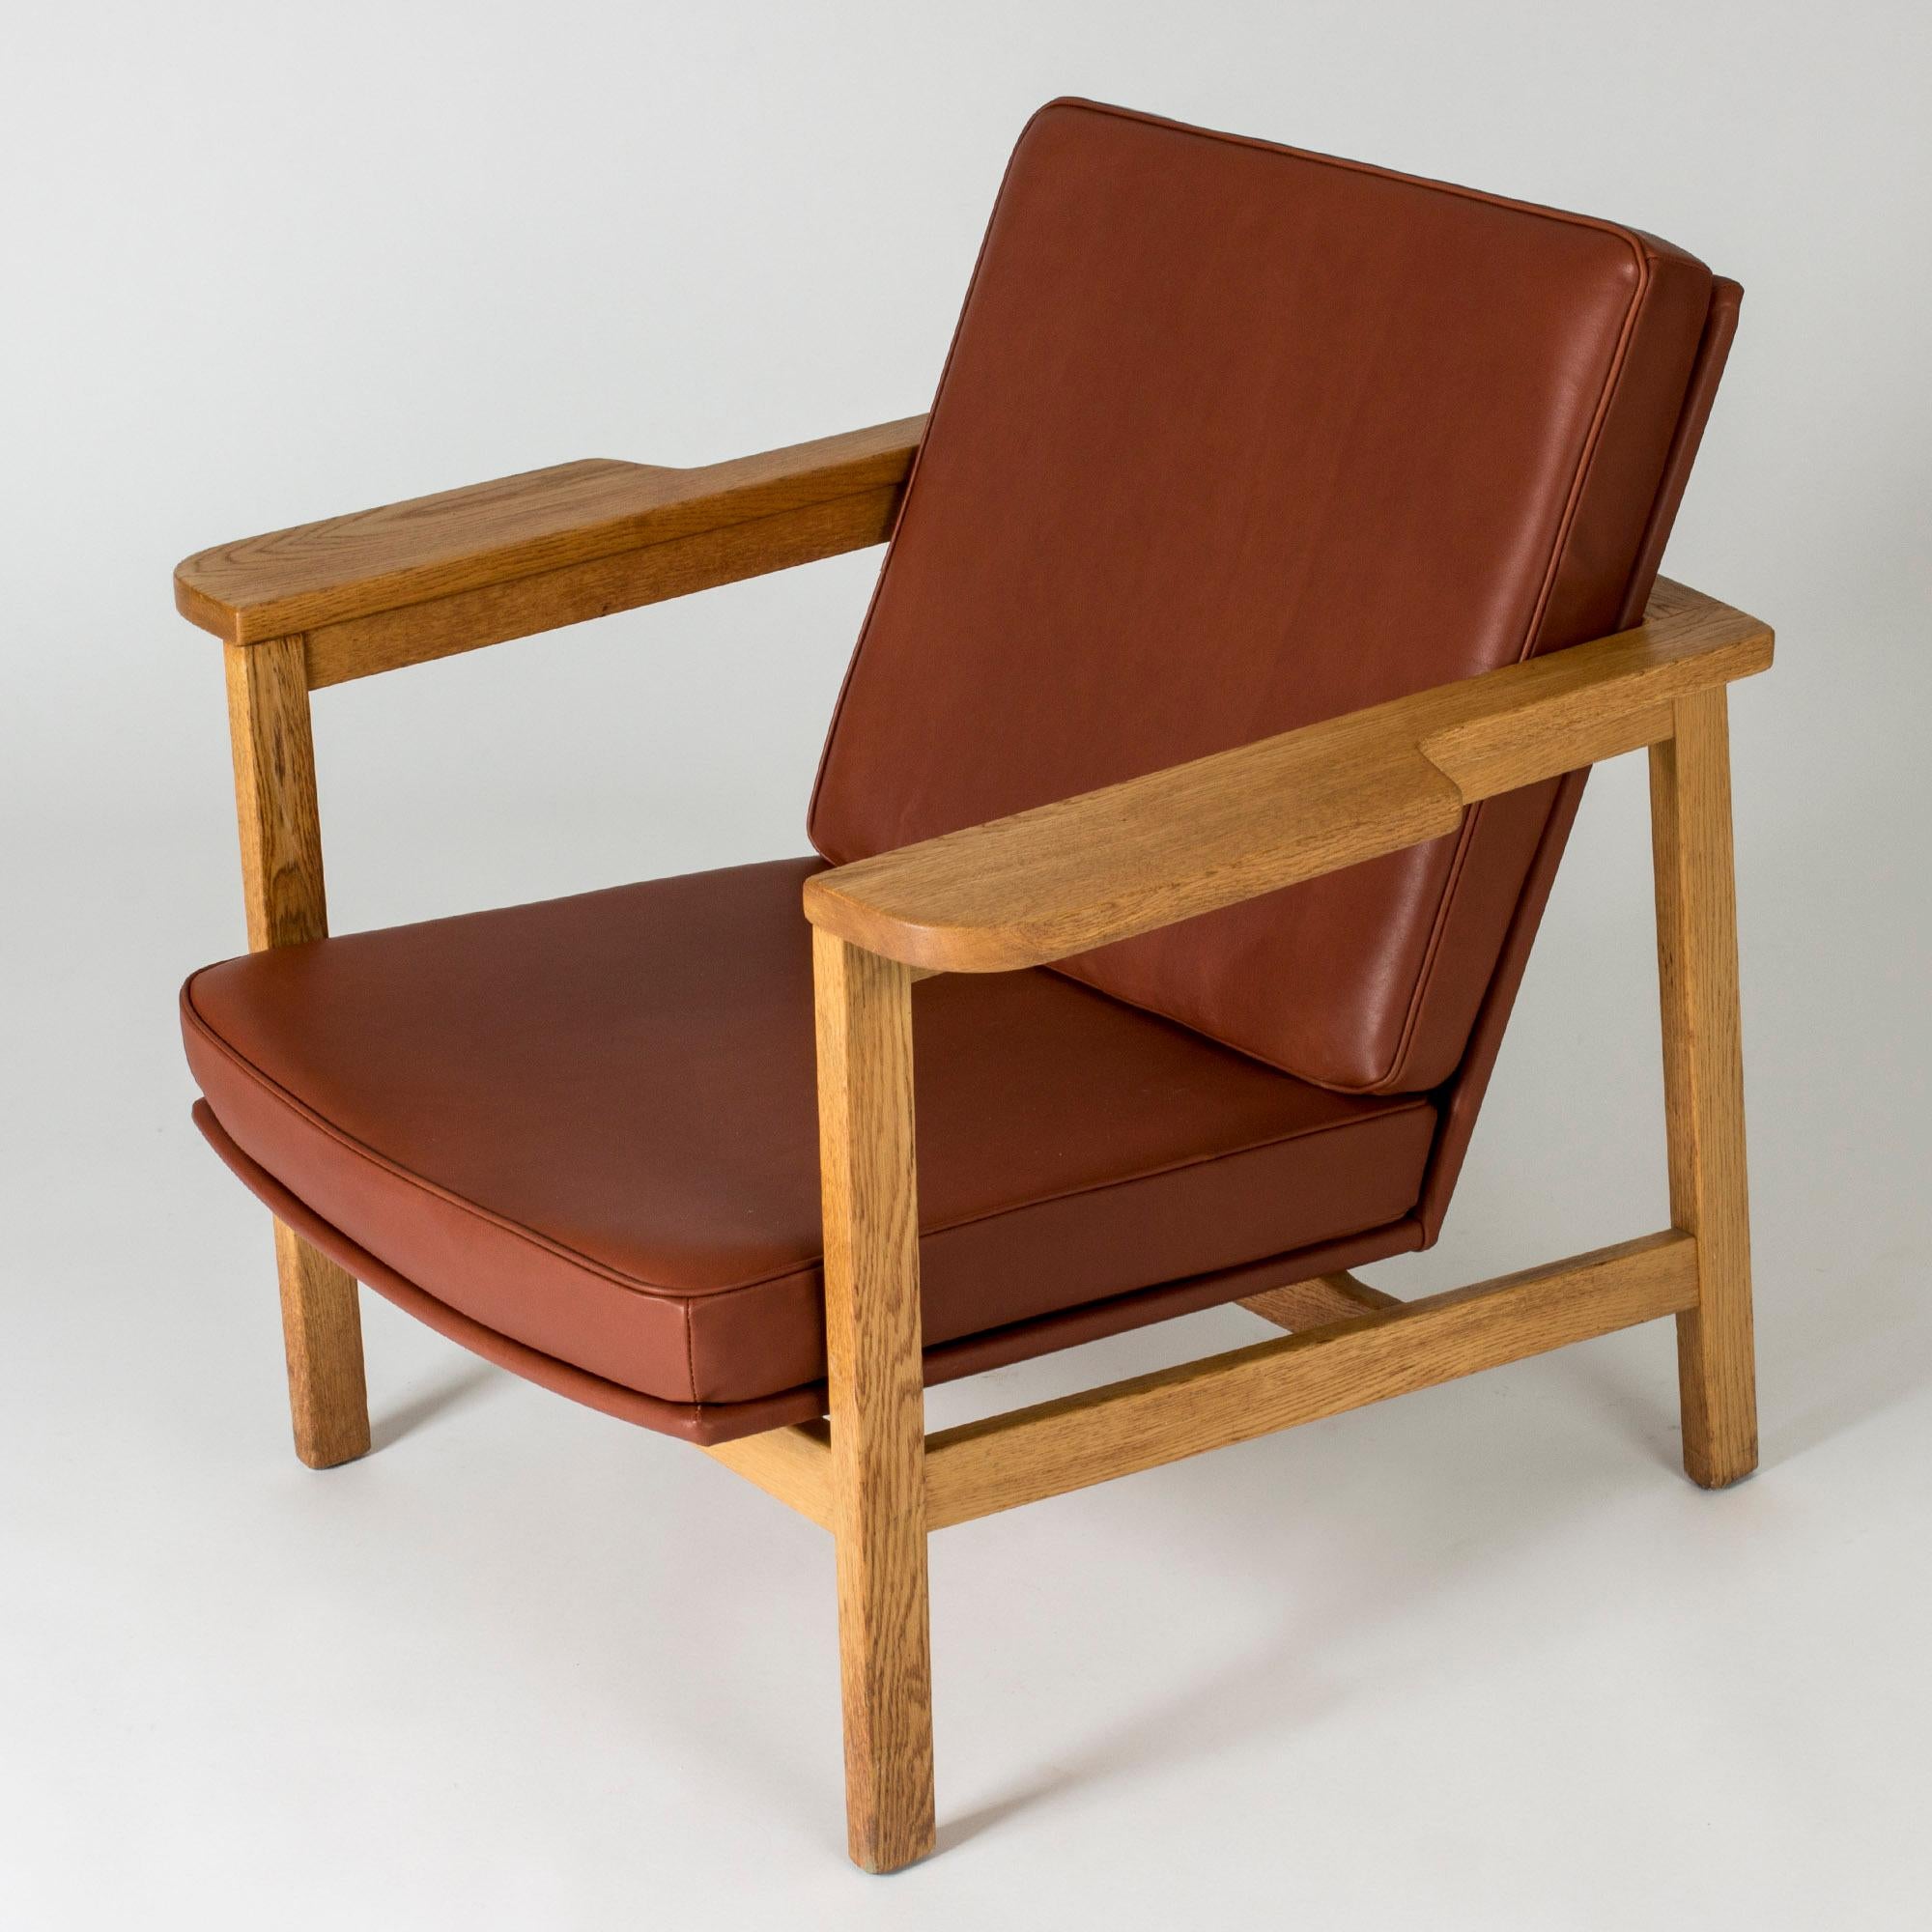 Pair of Lounge Chairs by Carl-Axel Acking for Nordiska Kompaniet, Sweden, 1950s In Good Condition For Sale In Stockholm, SE